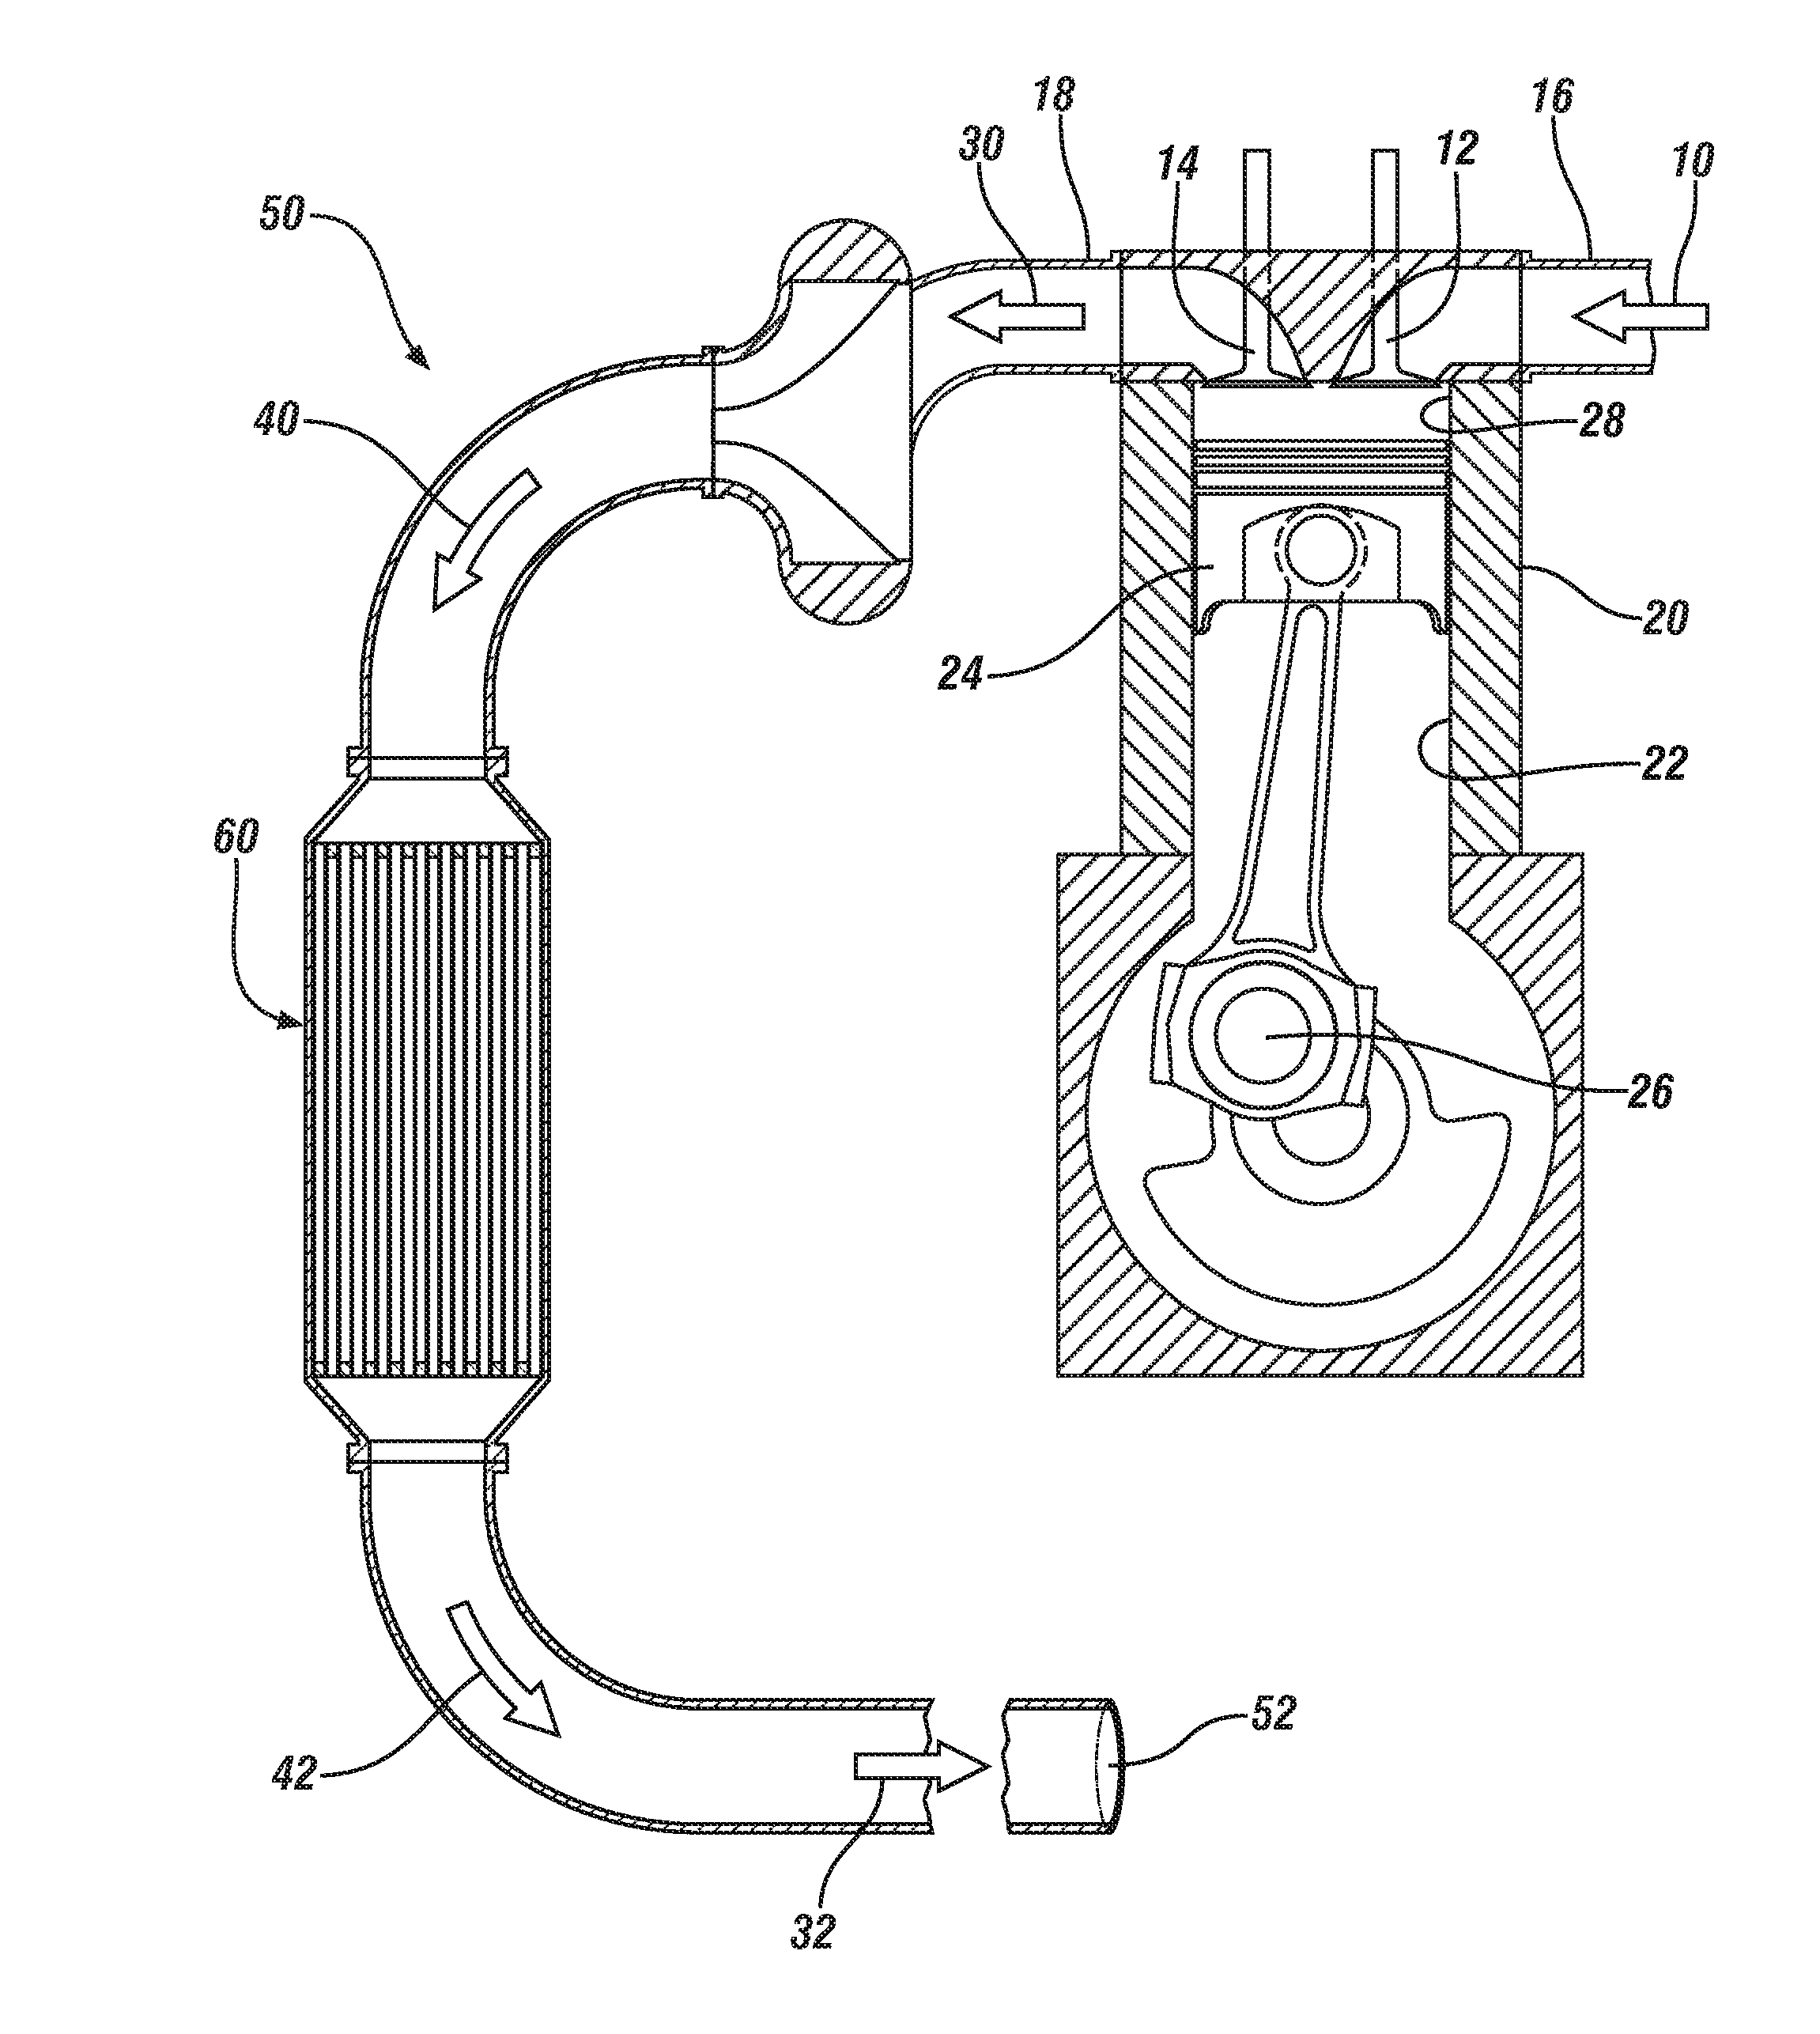 Oxidation catalysts for engines producing low temperature exhaust streams